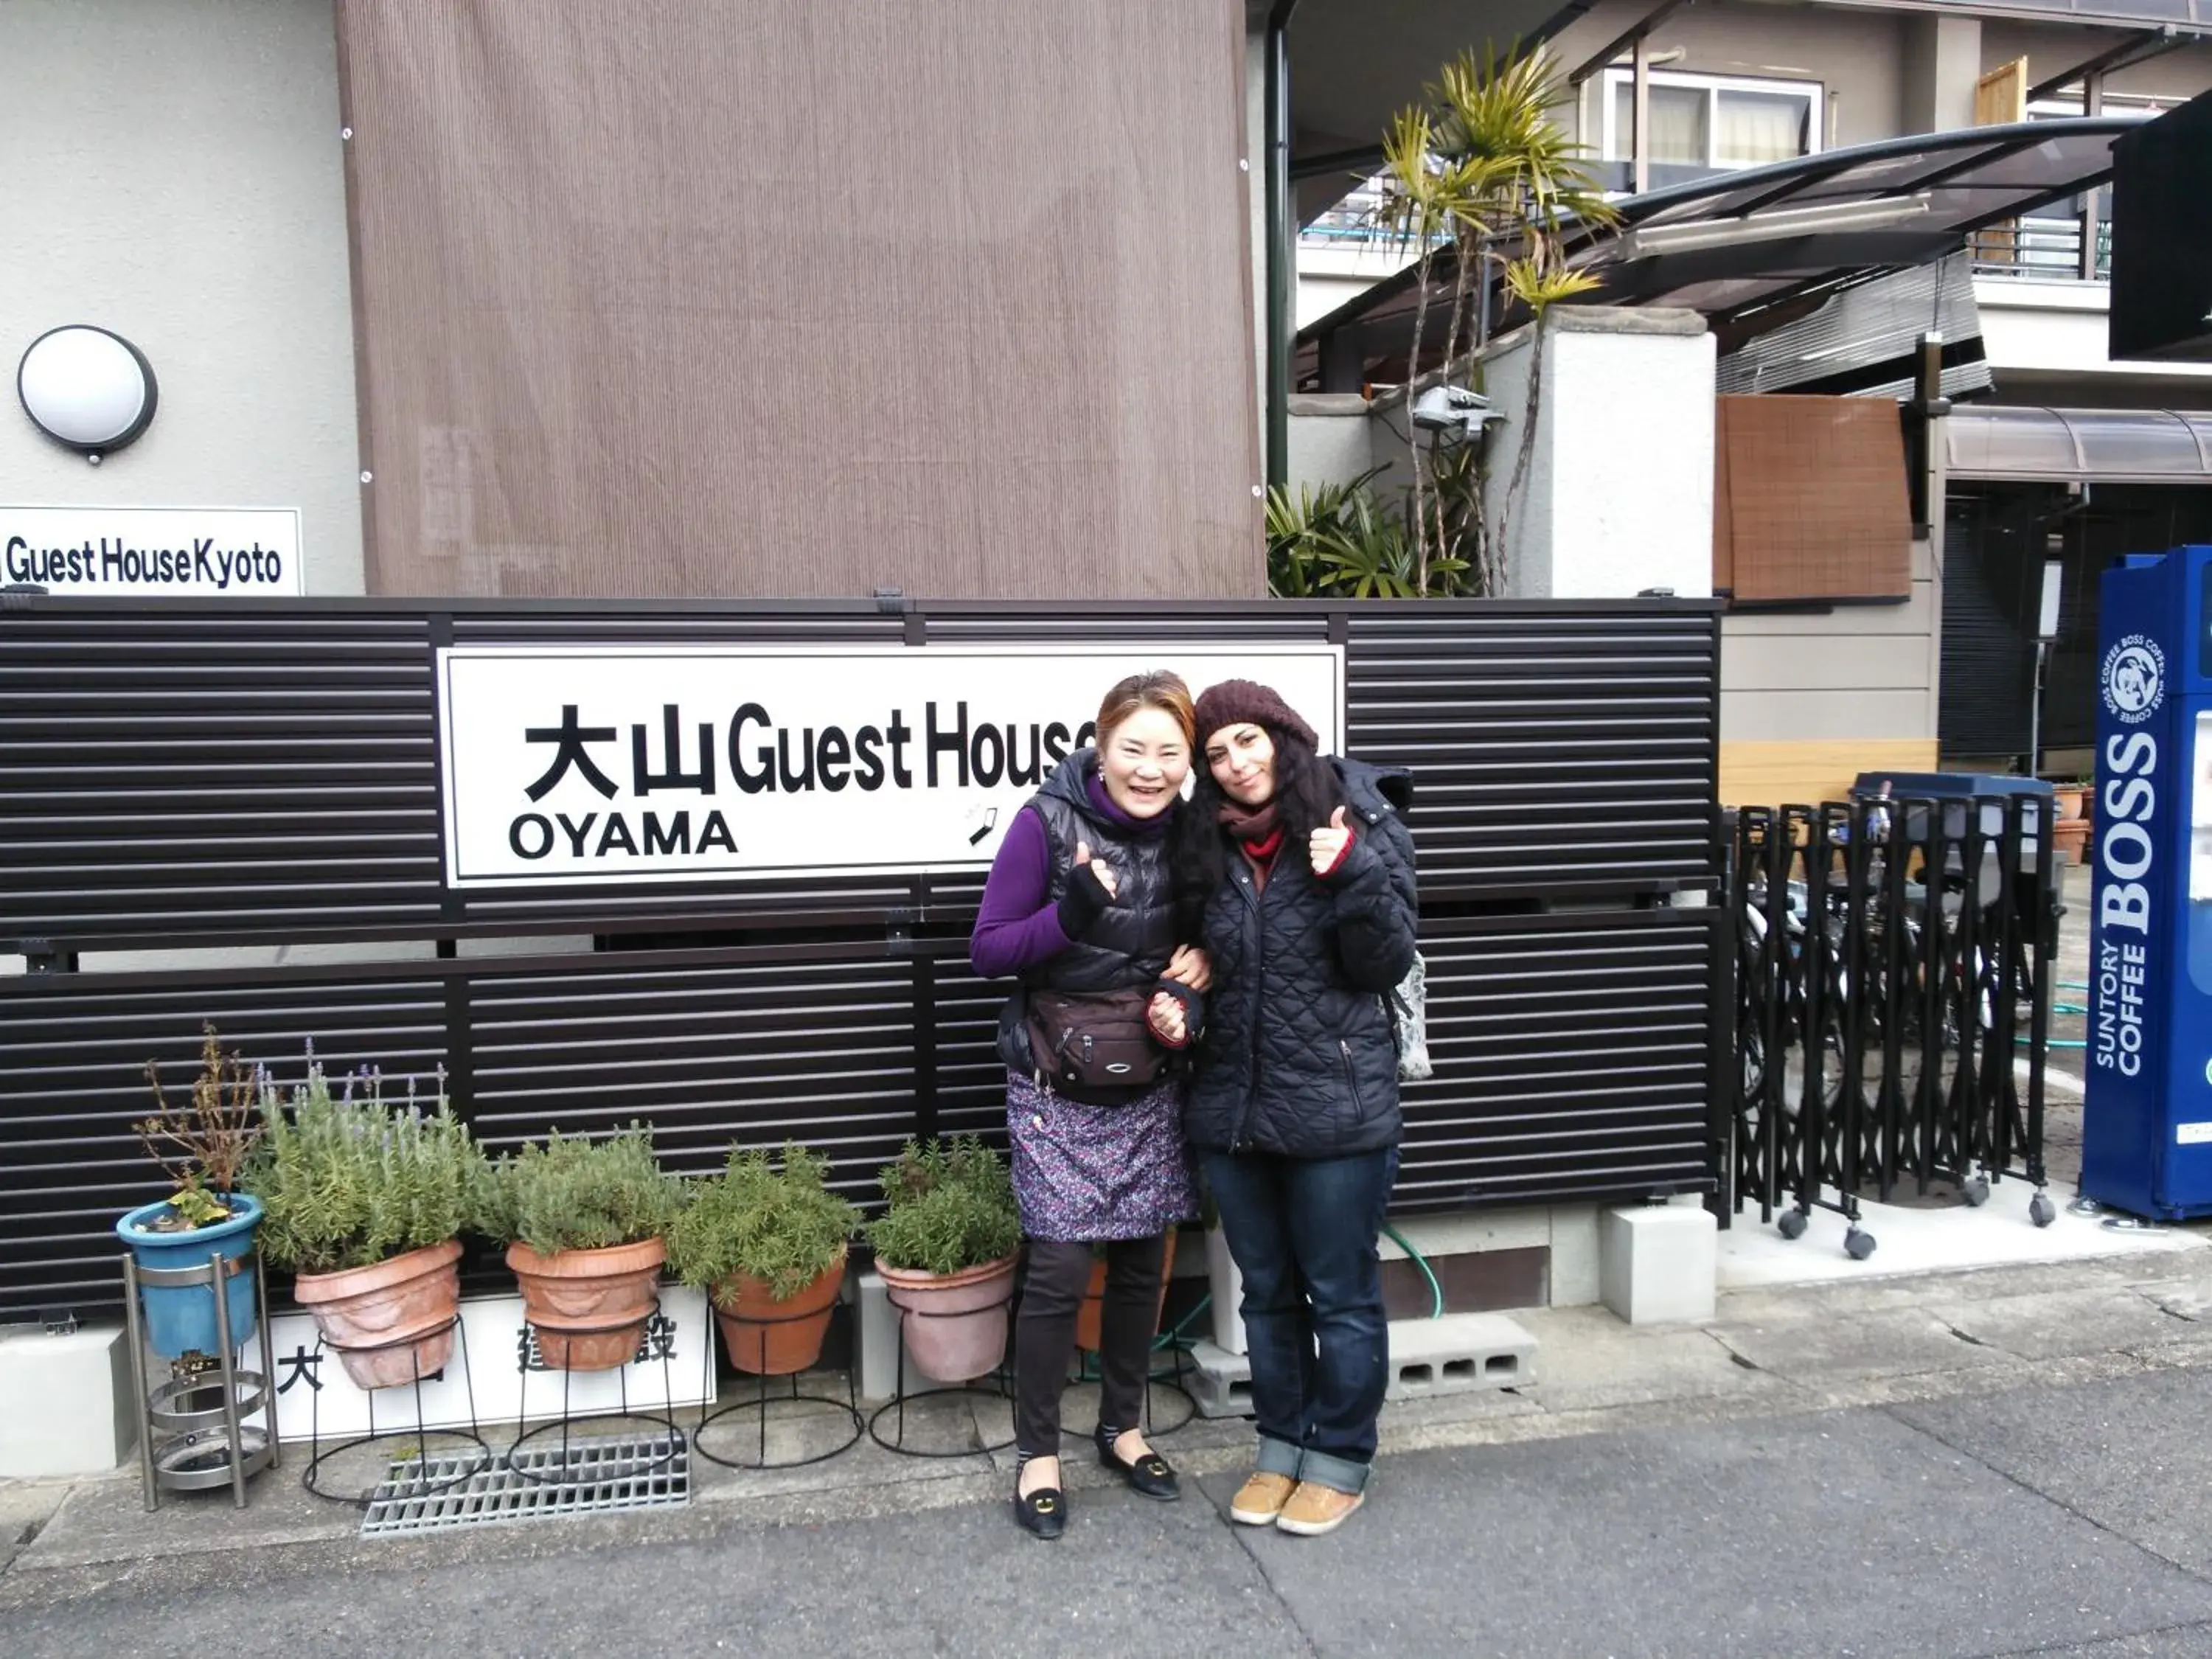 Guests, Facade/Entrance in Oyama Guest House Kyoto